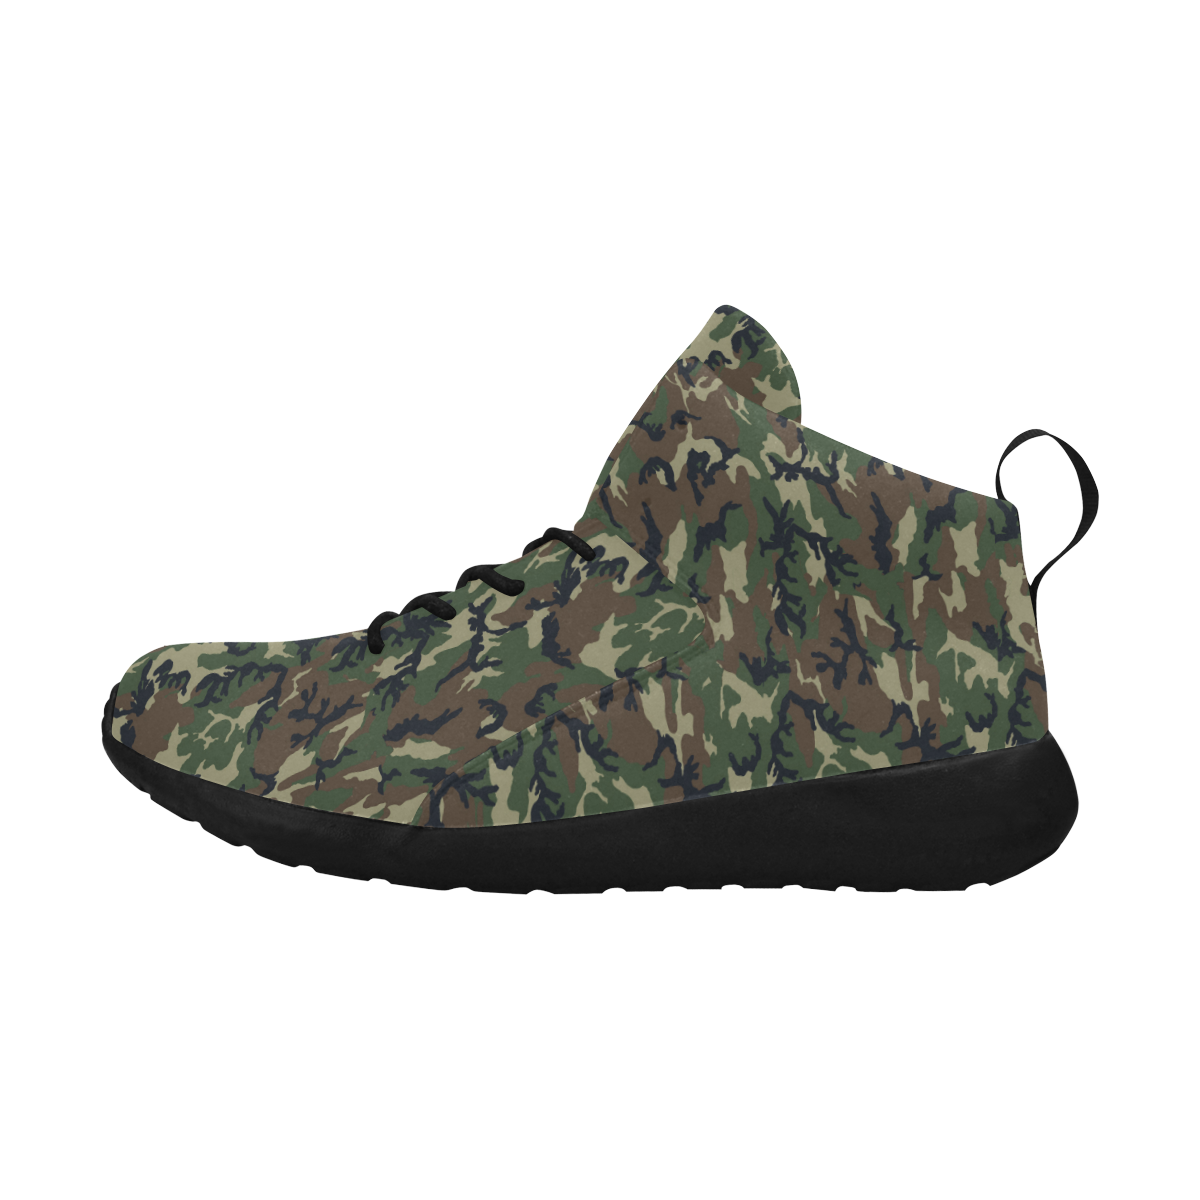 Woodland Forest Green Camouflage Women's Chukka Training Shoes (Model 57502)